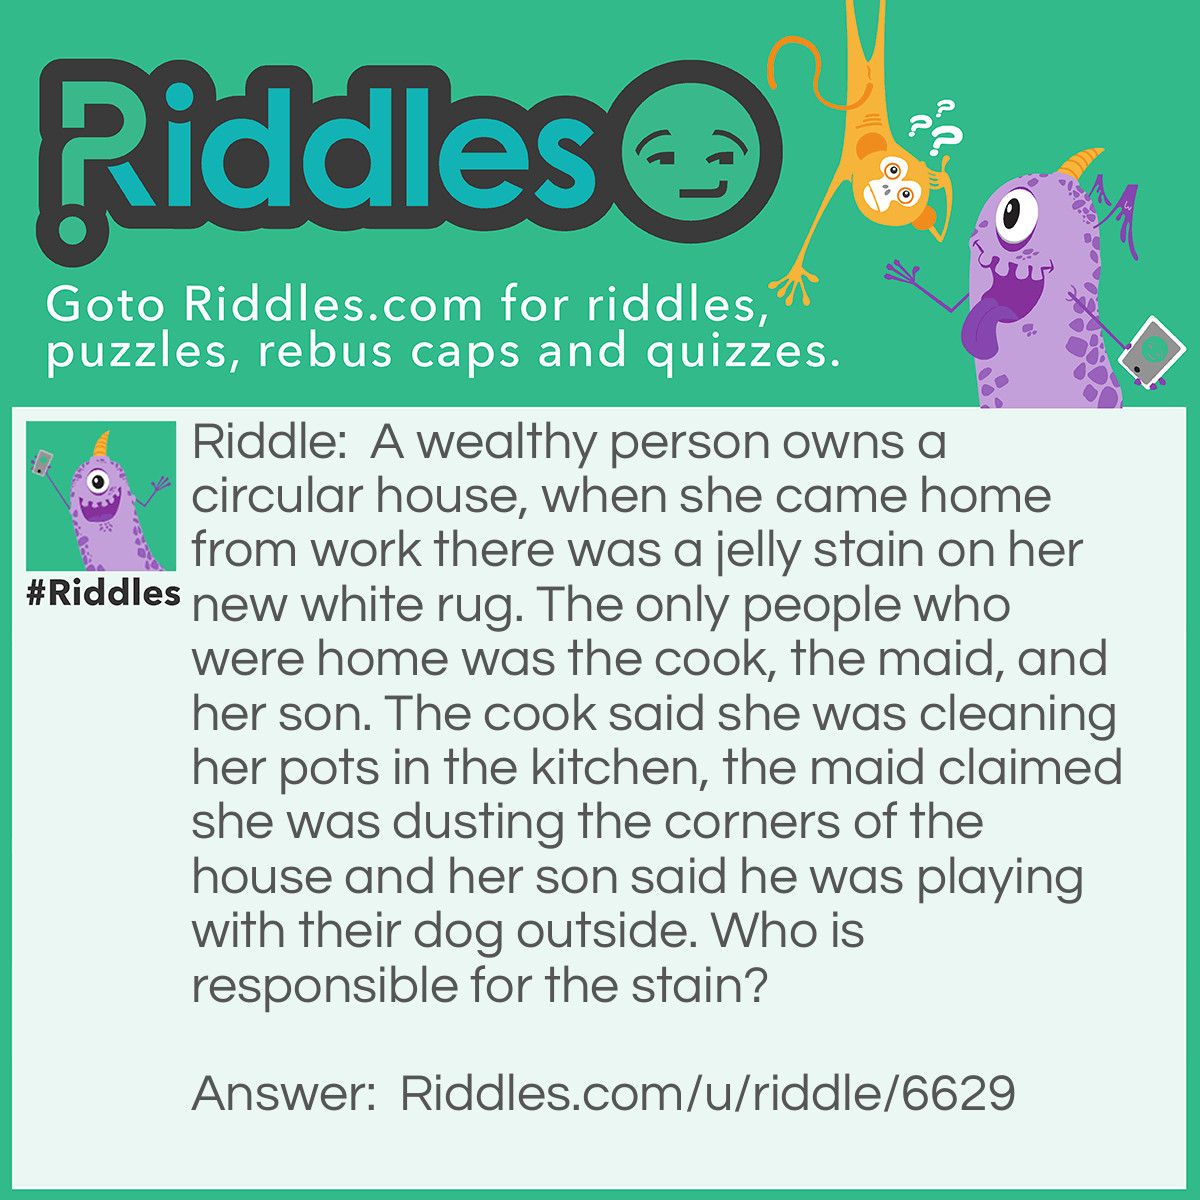 Riddle: A wealthy person owns a circular house, when she came home from work there was a jelly stain on her new white rug. The only people who were home was the cook, the maid, and her son. The cook said she was cleaning her pots in the kitchen, the maid claimed she was dusting the corners of the house and her son said he was playing with their dog outside. Who is responsible for the stain? Answer: The maid because it is a circular house (you have to pretend that there is no corners). :-)